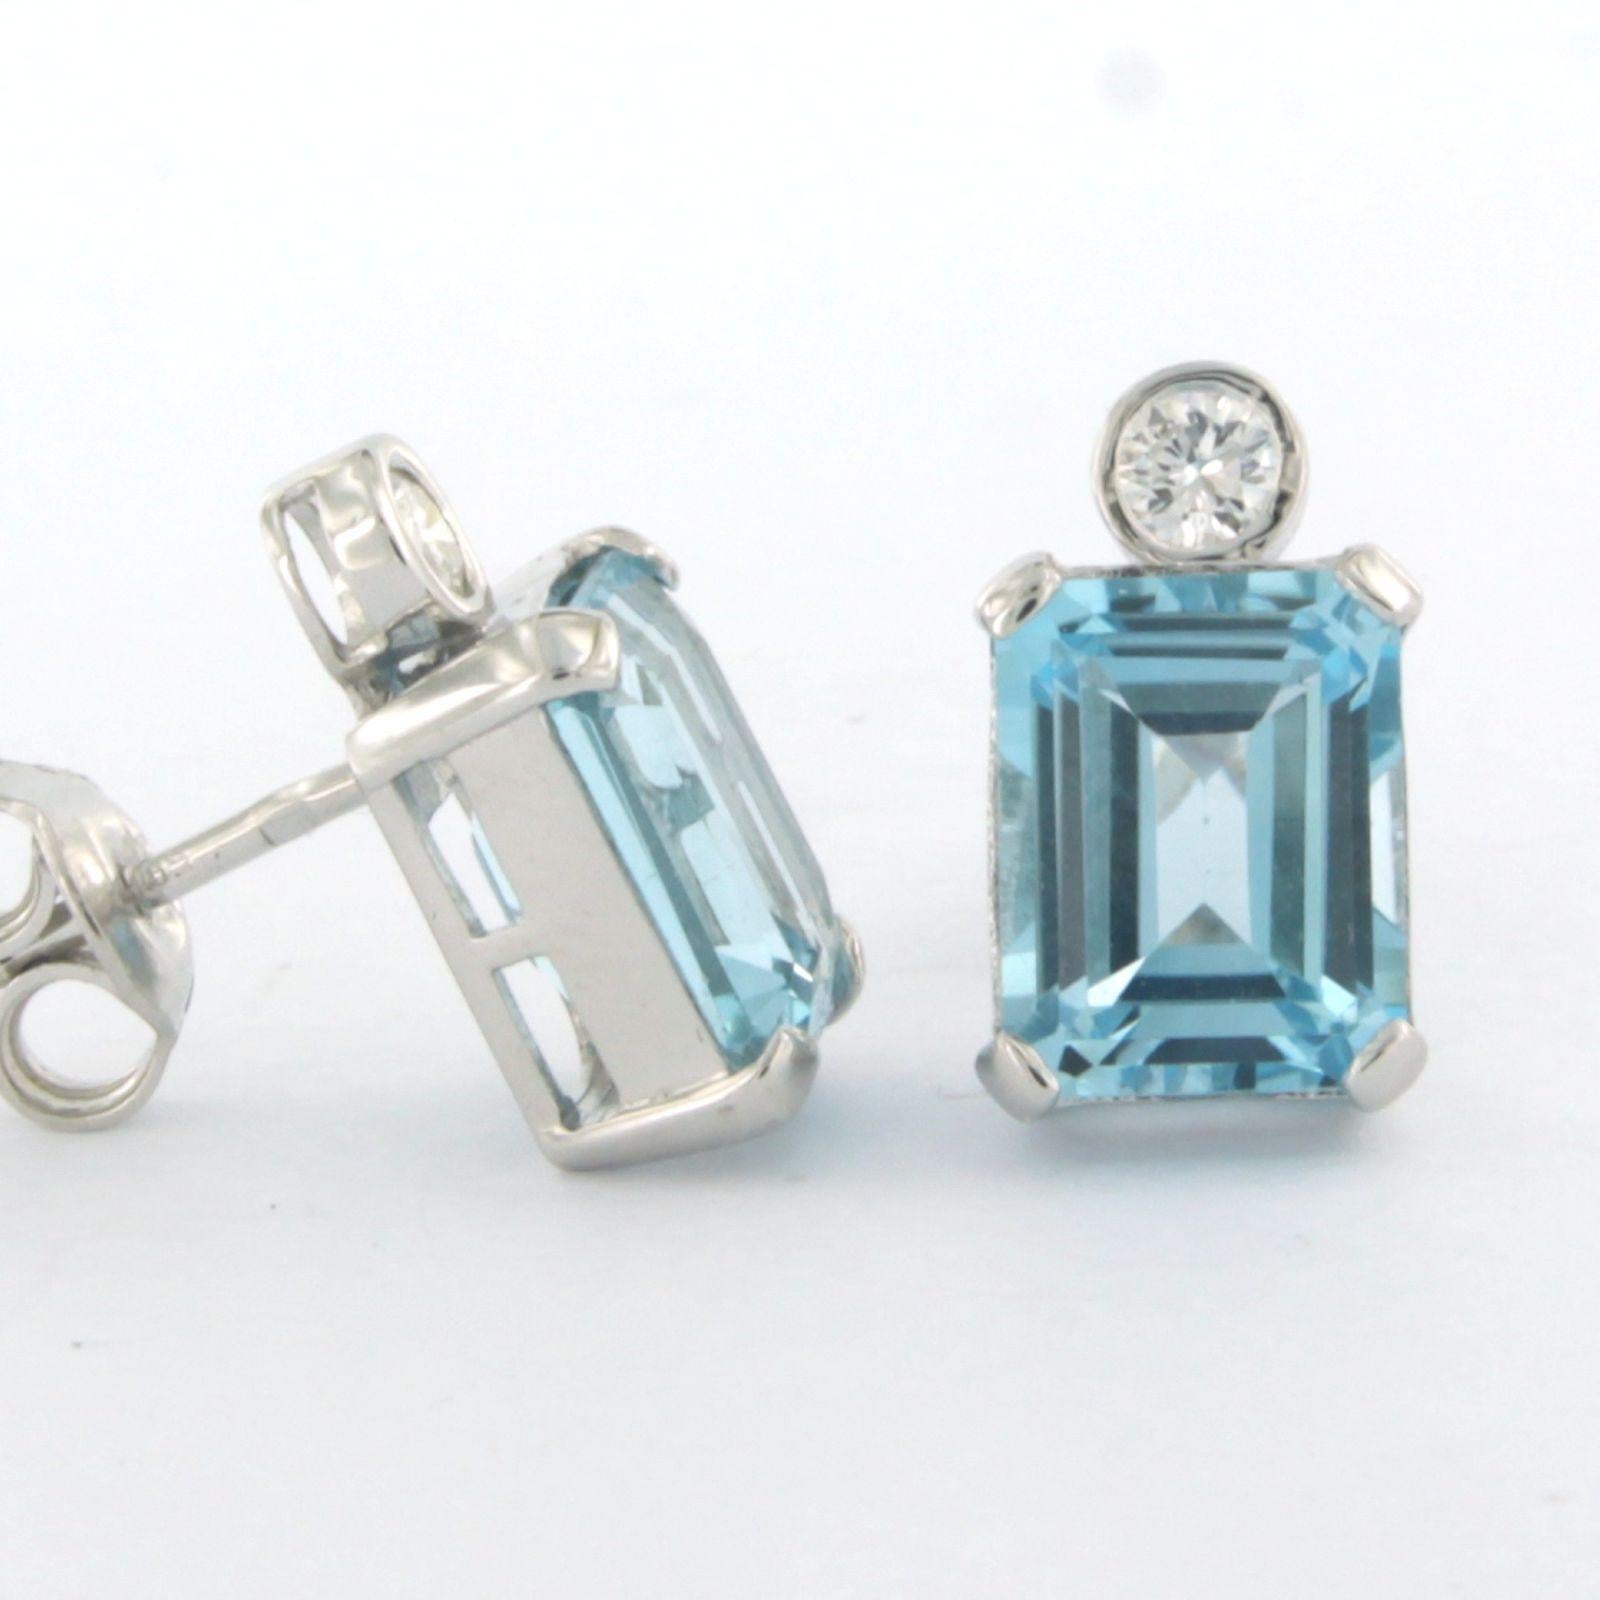 Brilliant Cut Earrings set with topaz and diamonds 14k white gold